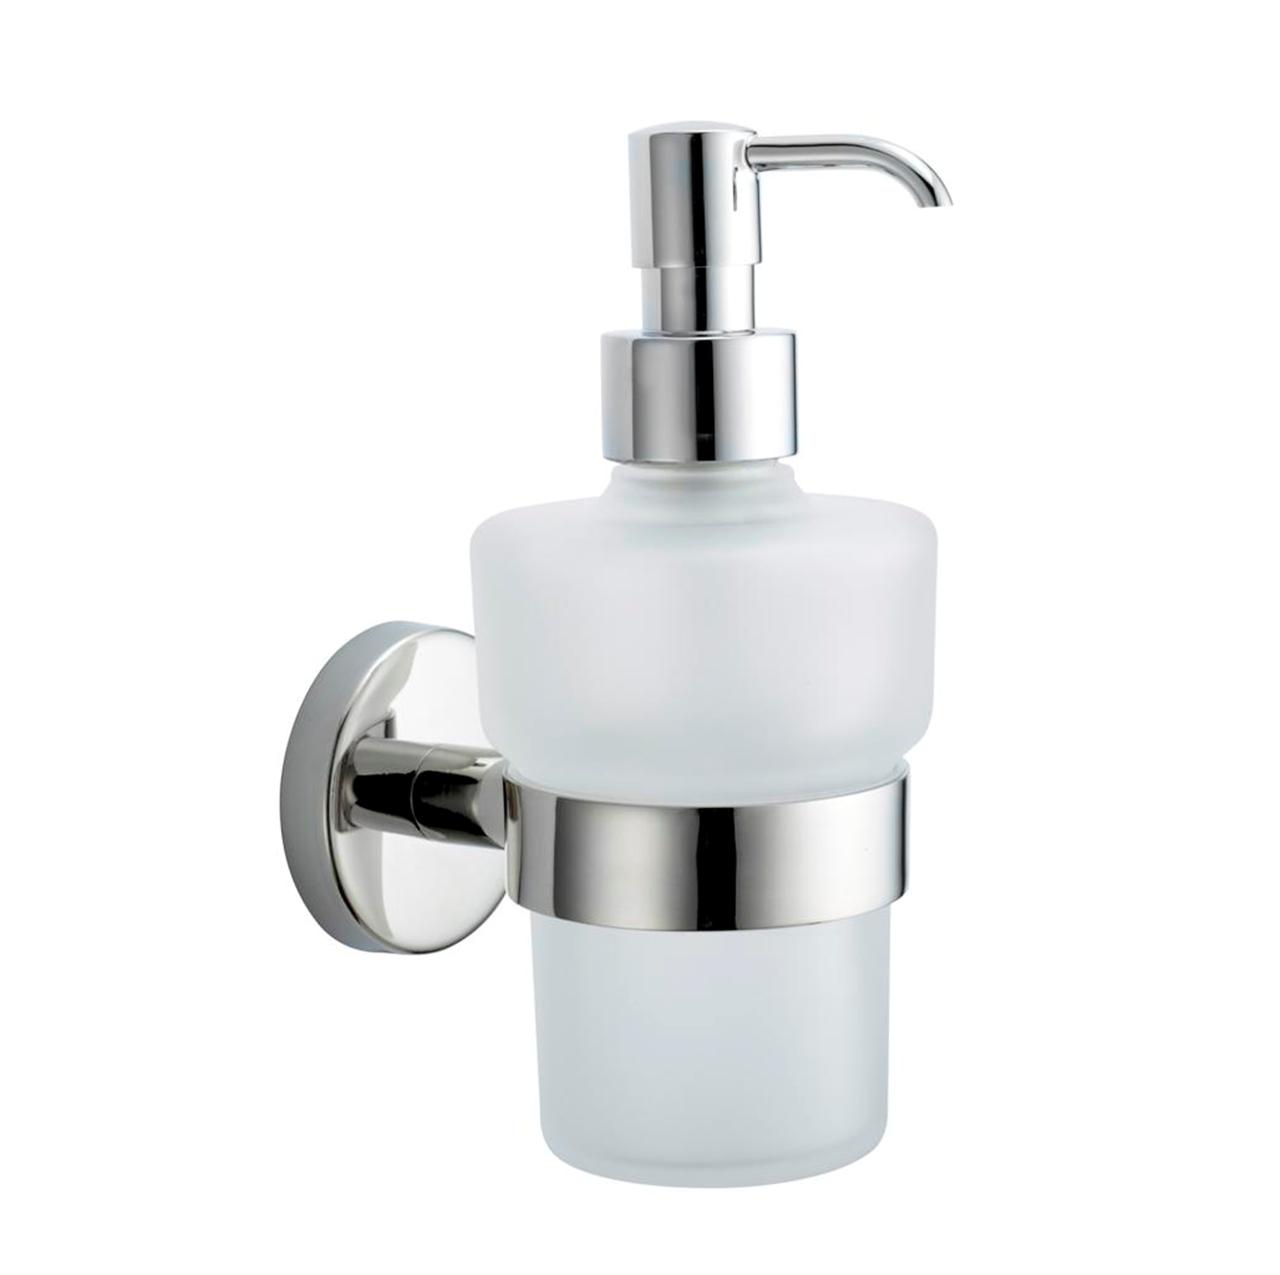 Soap dispenser wall mounted n50 